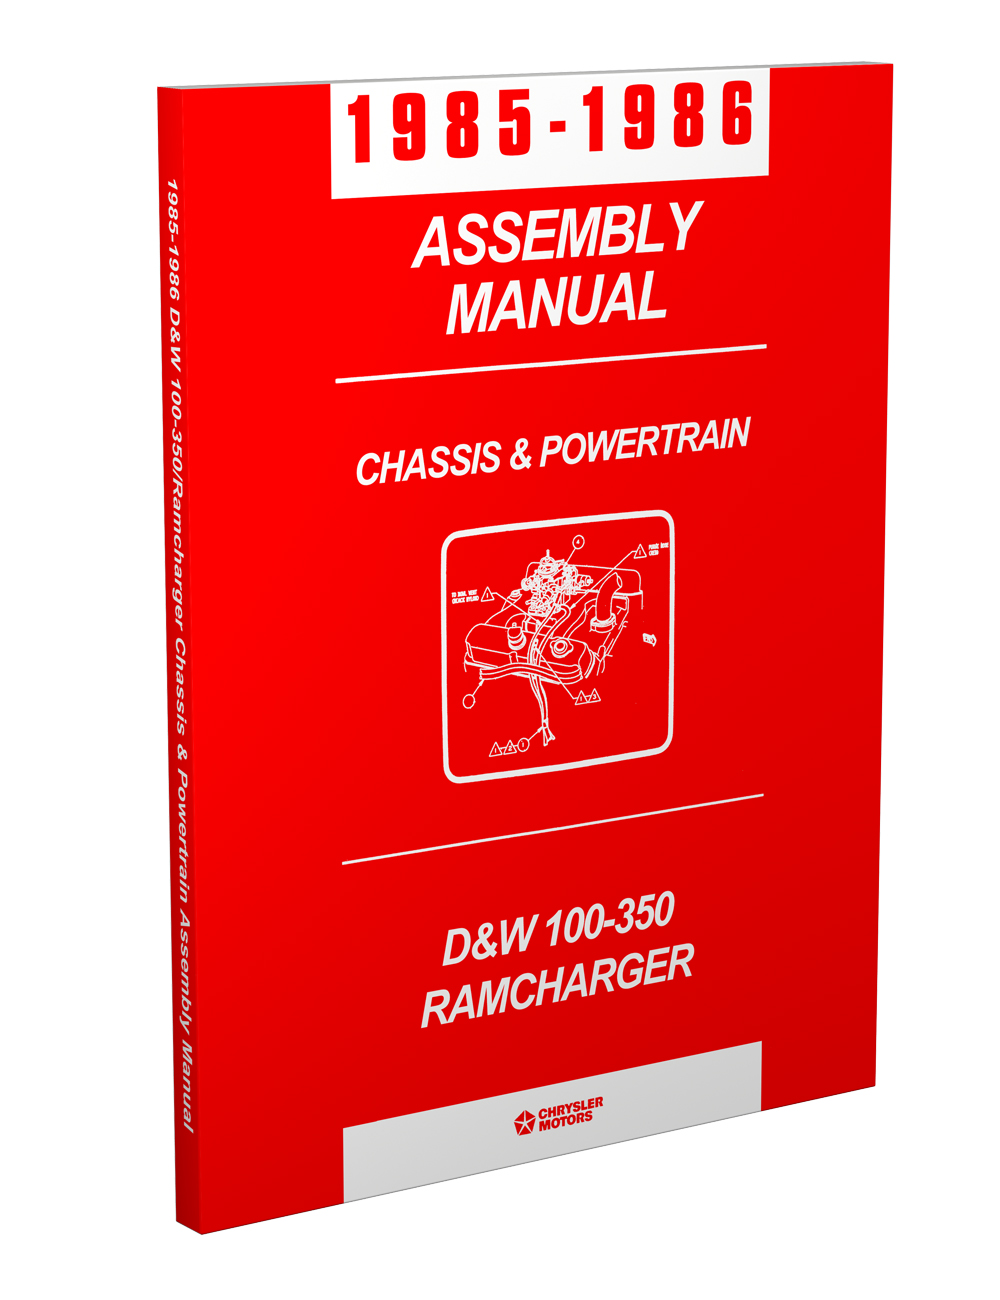 1985-1986 Dodge Pickup Truck and Ramcharger Chassis & Powertrain Assembly Manual Reprint